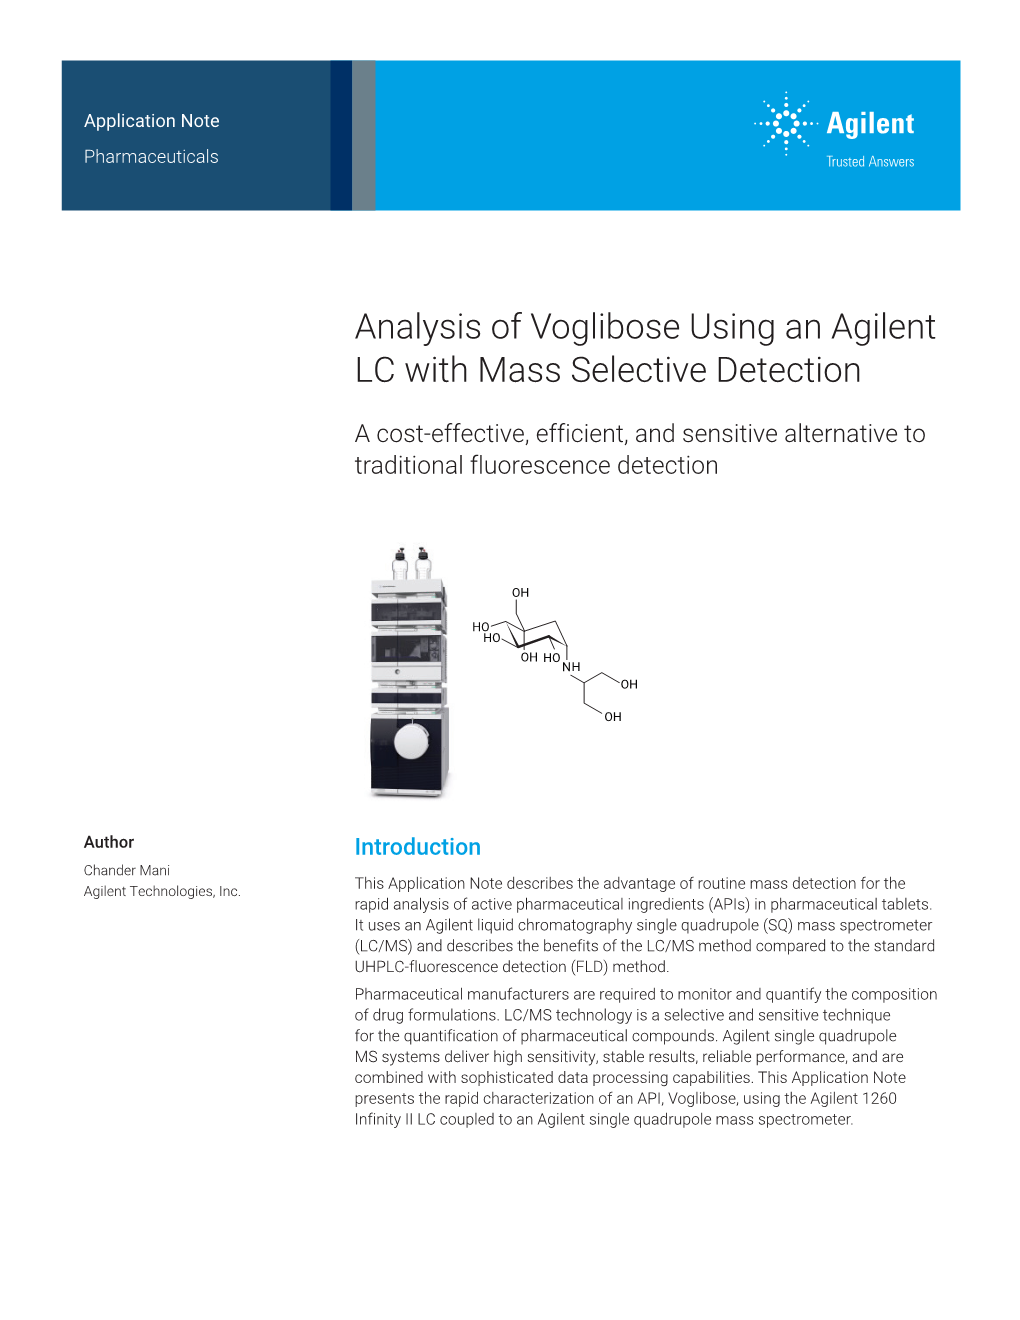 Analysis of Voglibose Using an Agilent LC with Mass Selective Detection